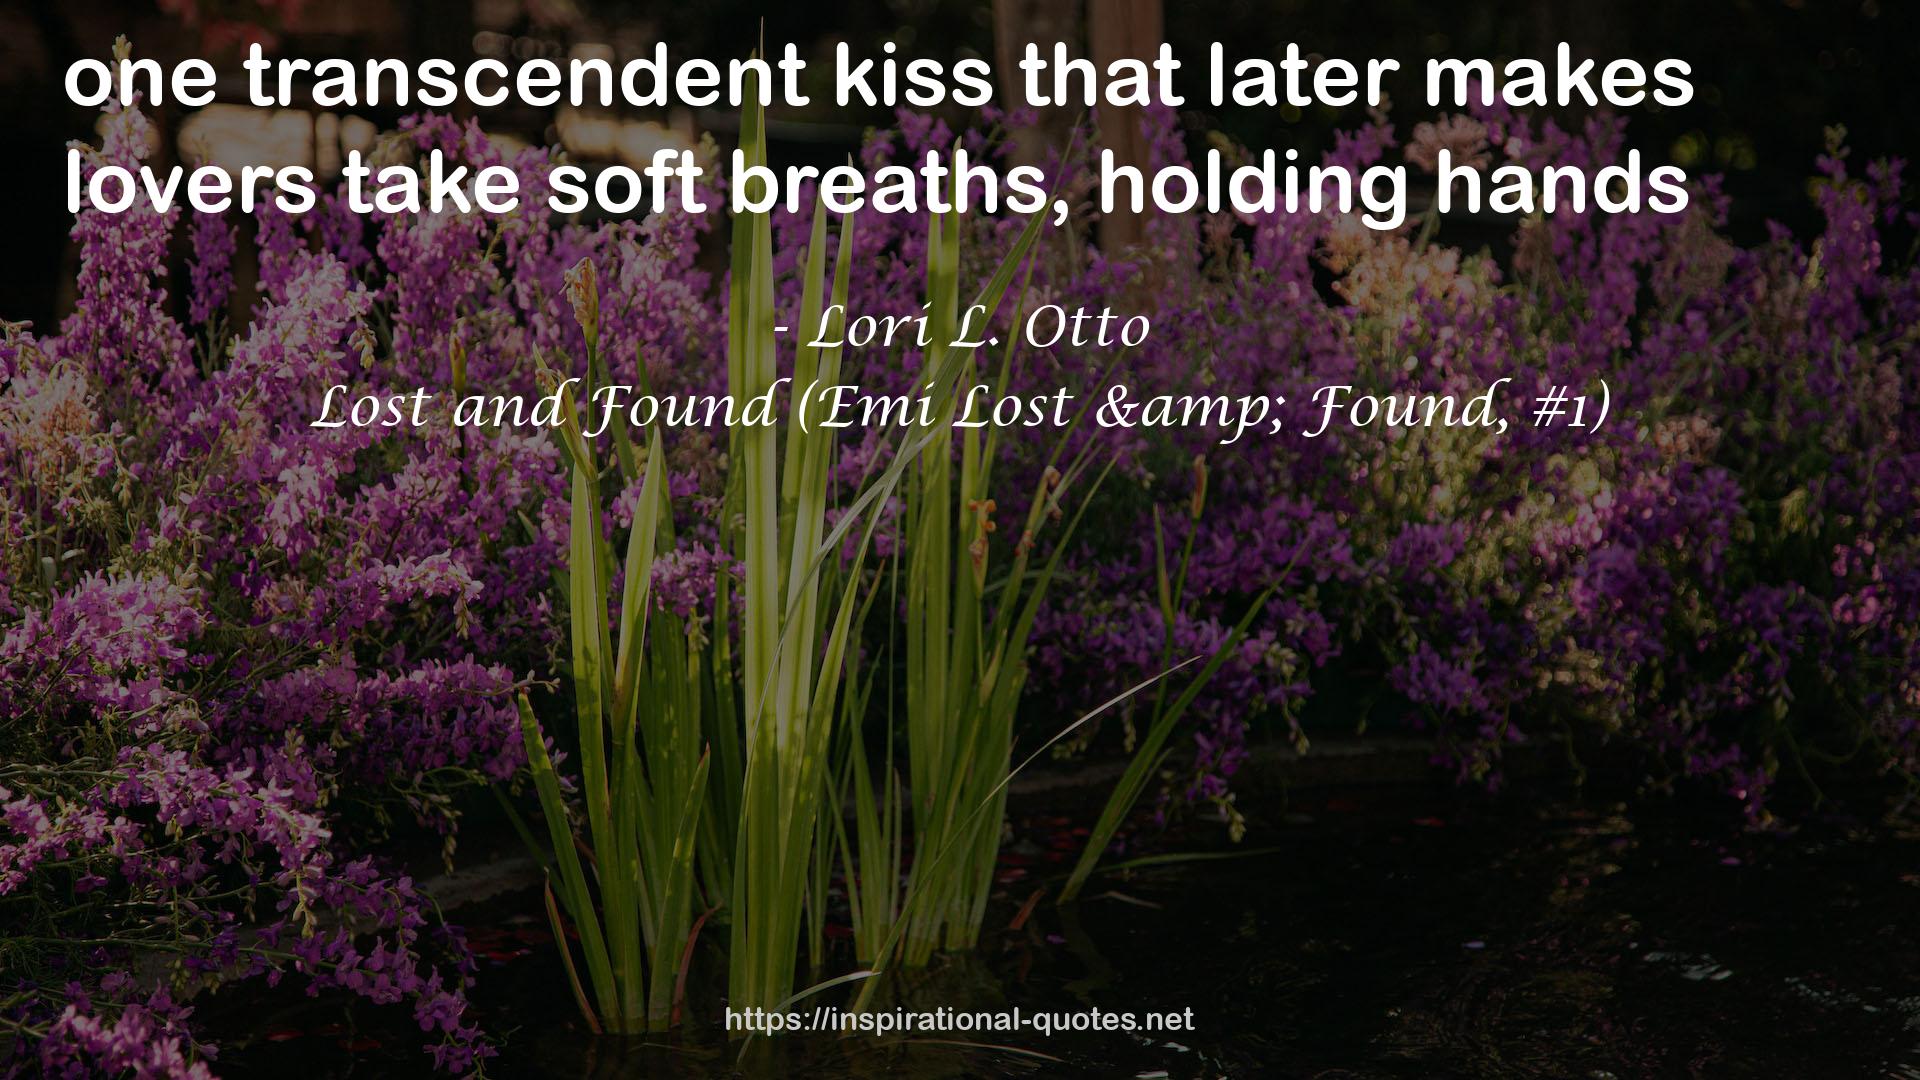 Lost and Found (Emi Lost & Found, #1) QUOTES